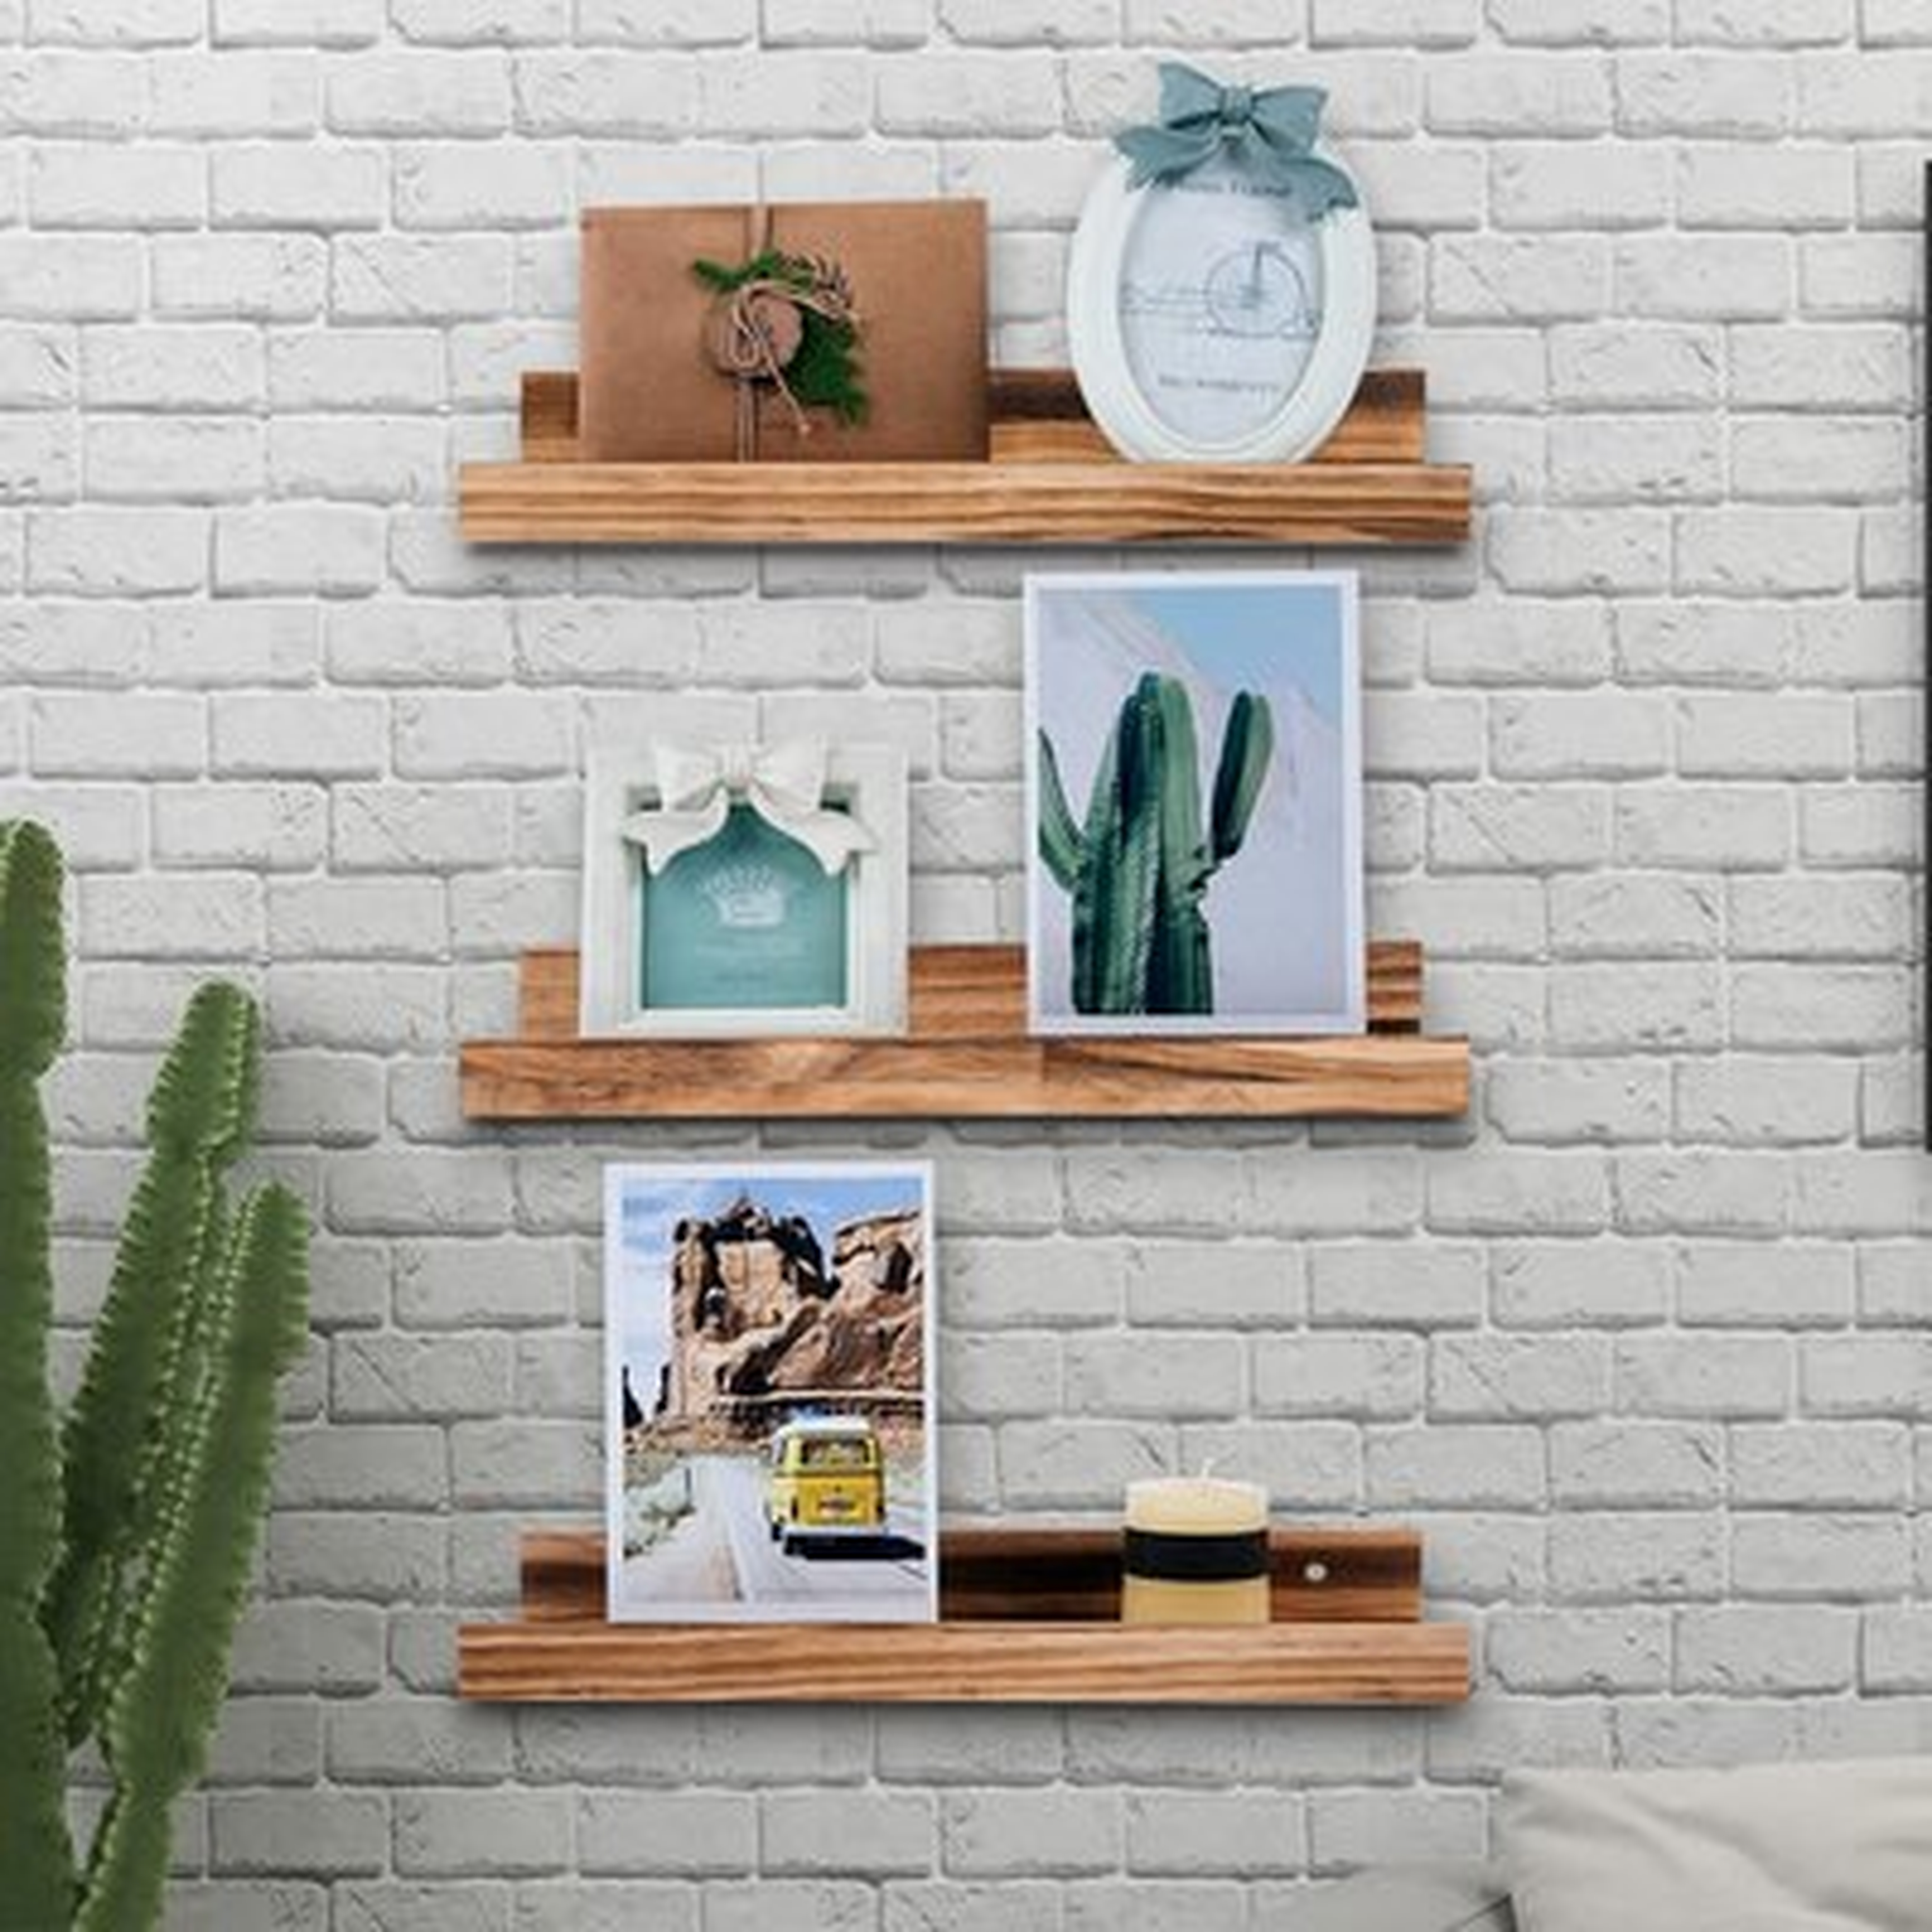 16 Inch Floating Shelves, Wall Mount Picture Ledge Wooden Wall Shelf For Bedroom, Living Room, Office, Kitche, Set Of 3 Same Dimensions - Wayfair